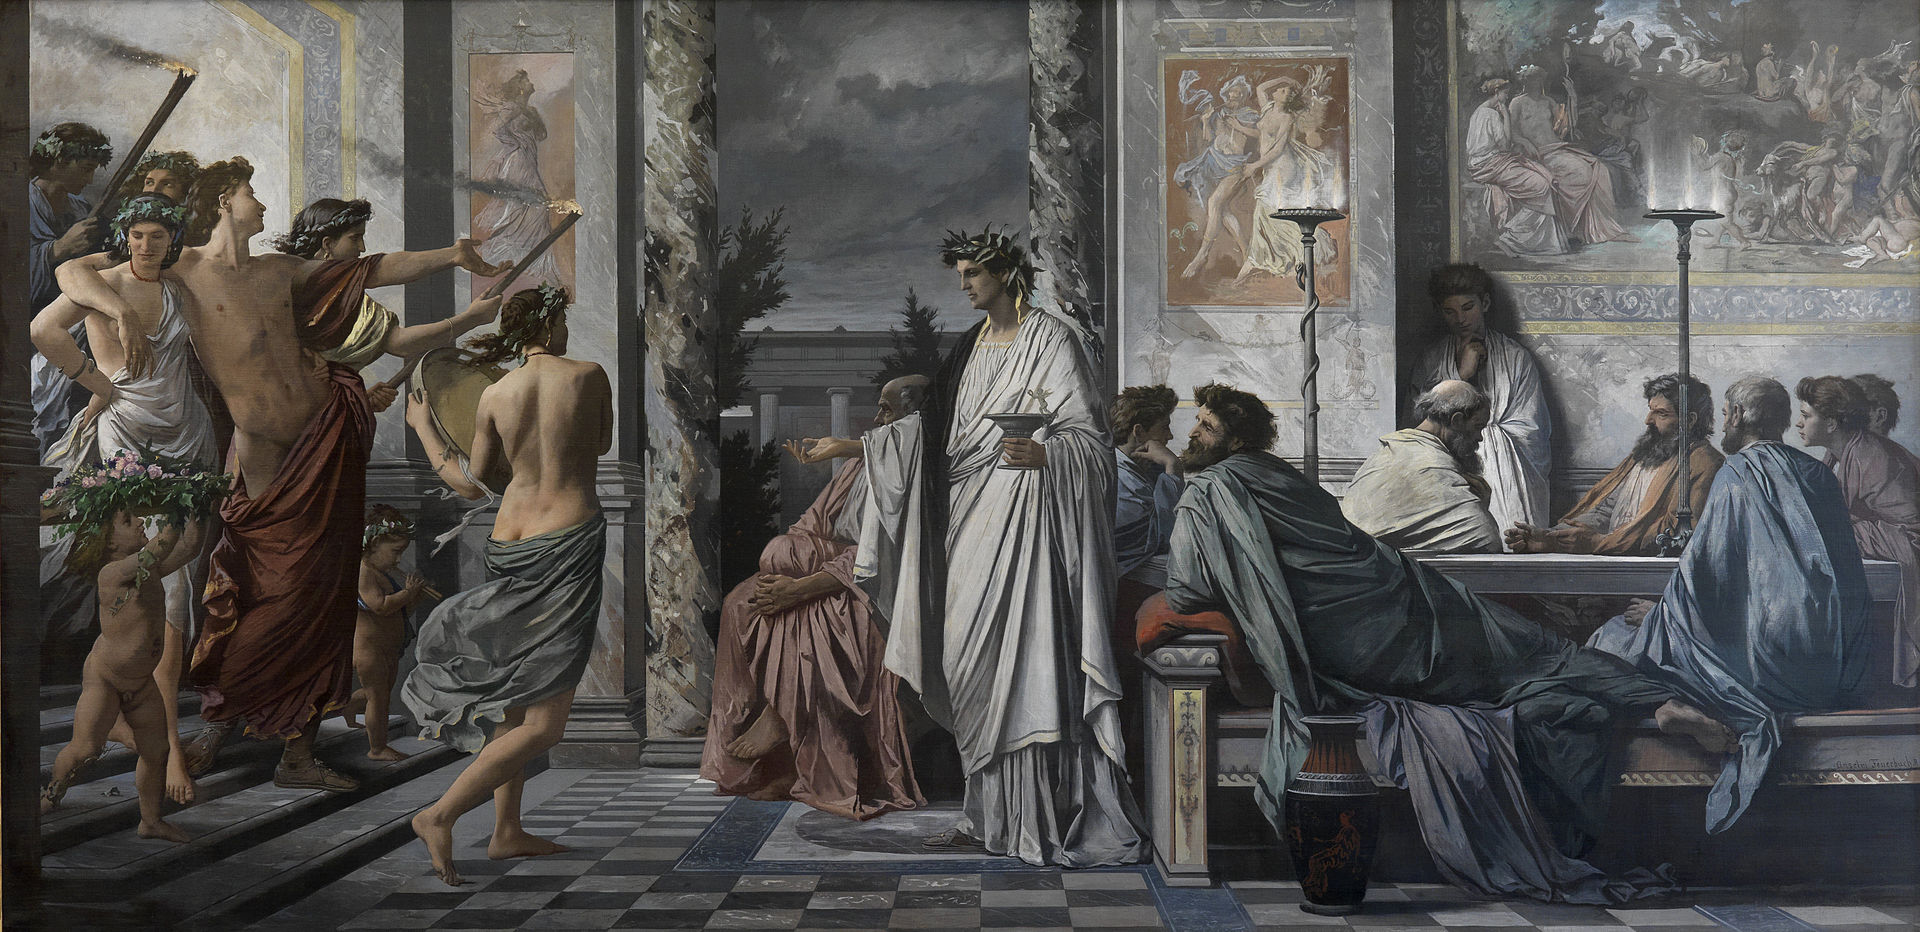 Plato's Symposium by Anselm Feuerbach, 1868 (Wikimedia Commons)